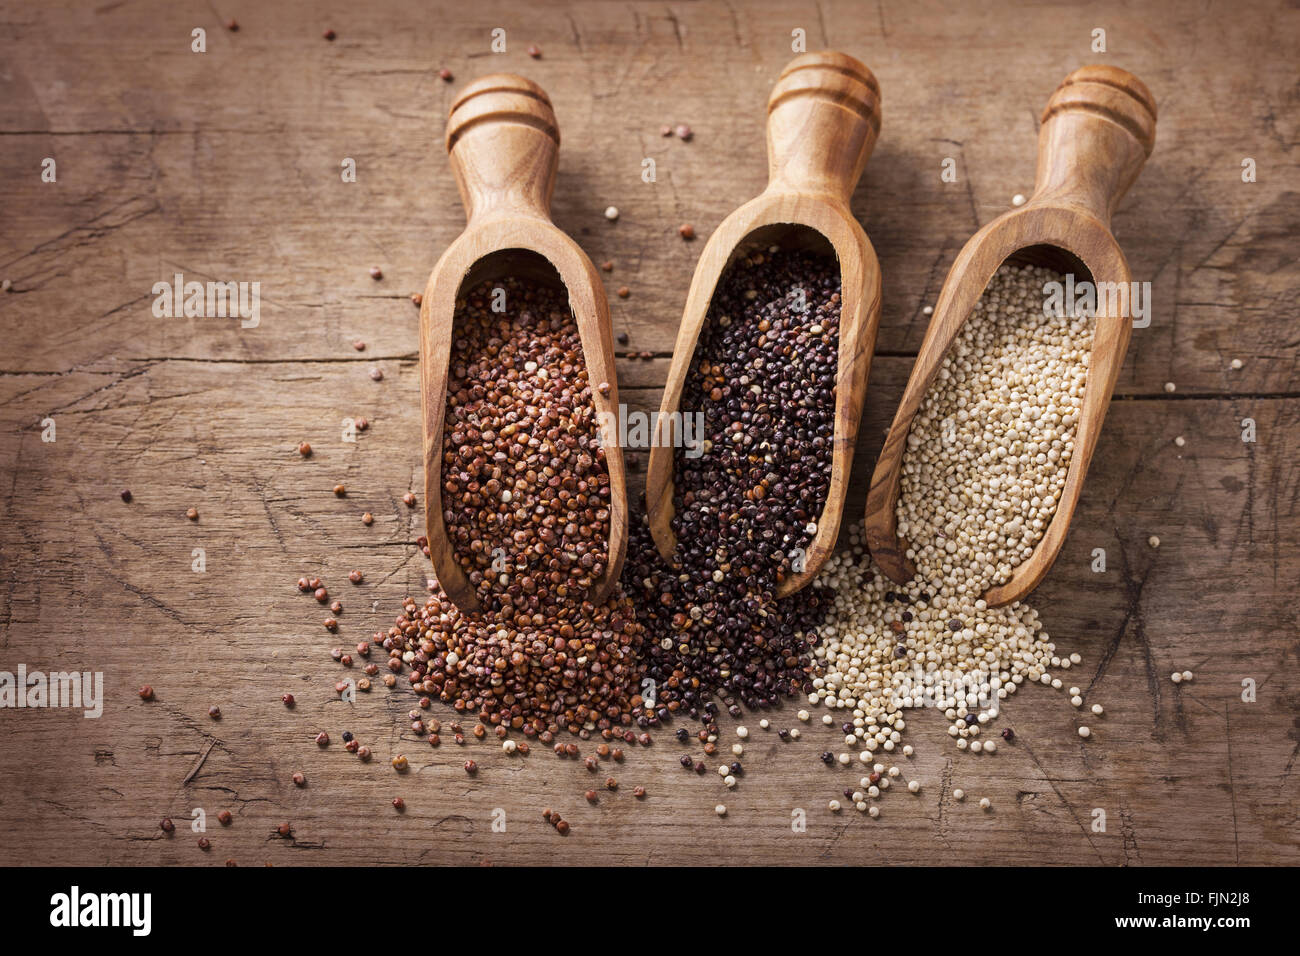 Red, black and white quinoa seeds on a wooden background Stock Photo